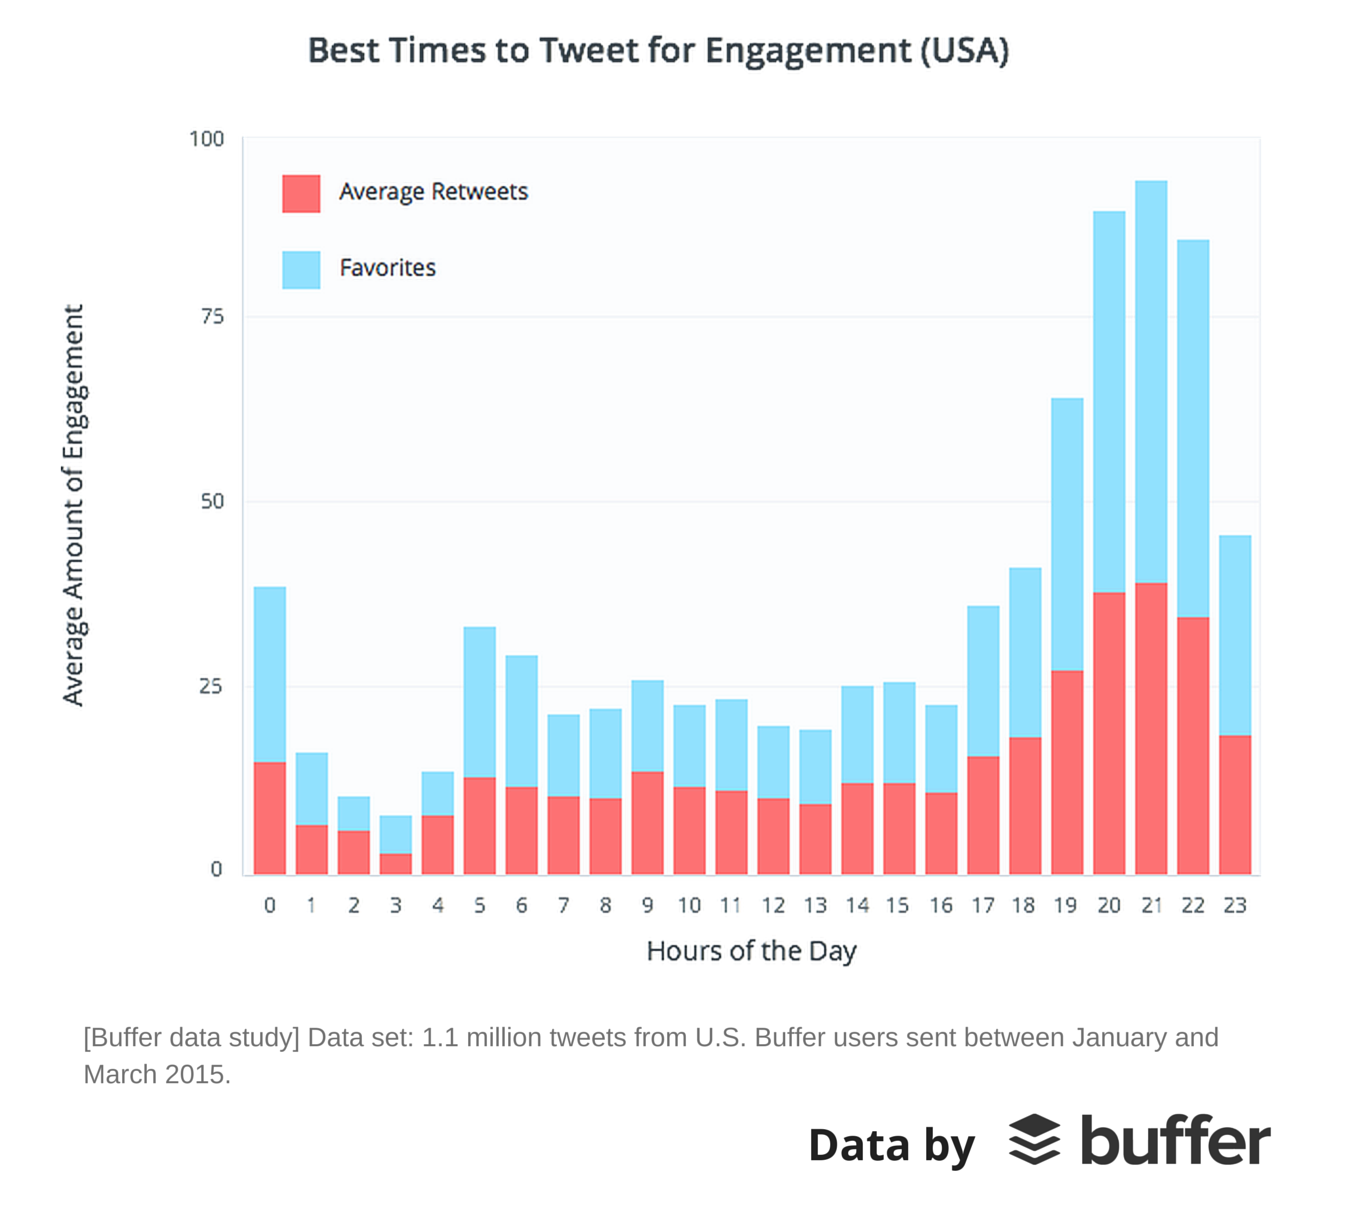 Best Times to Tweet for Engagement USA